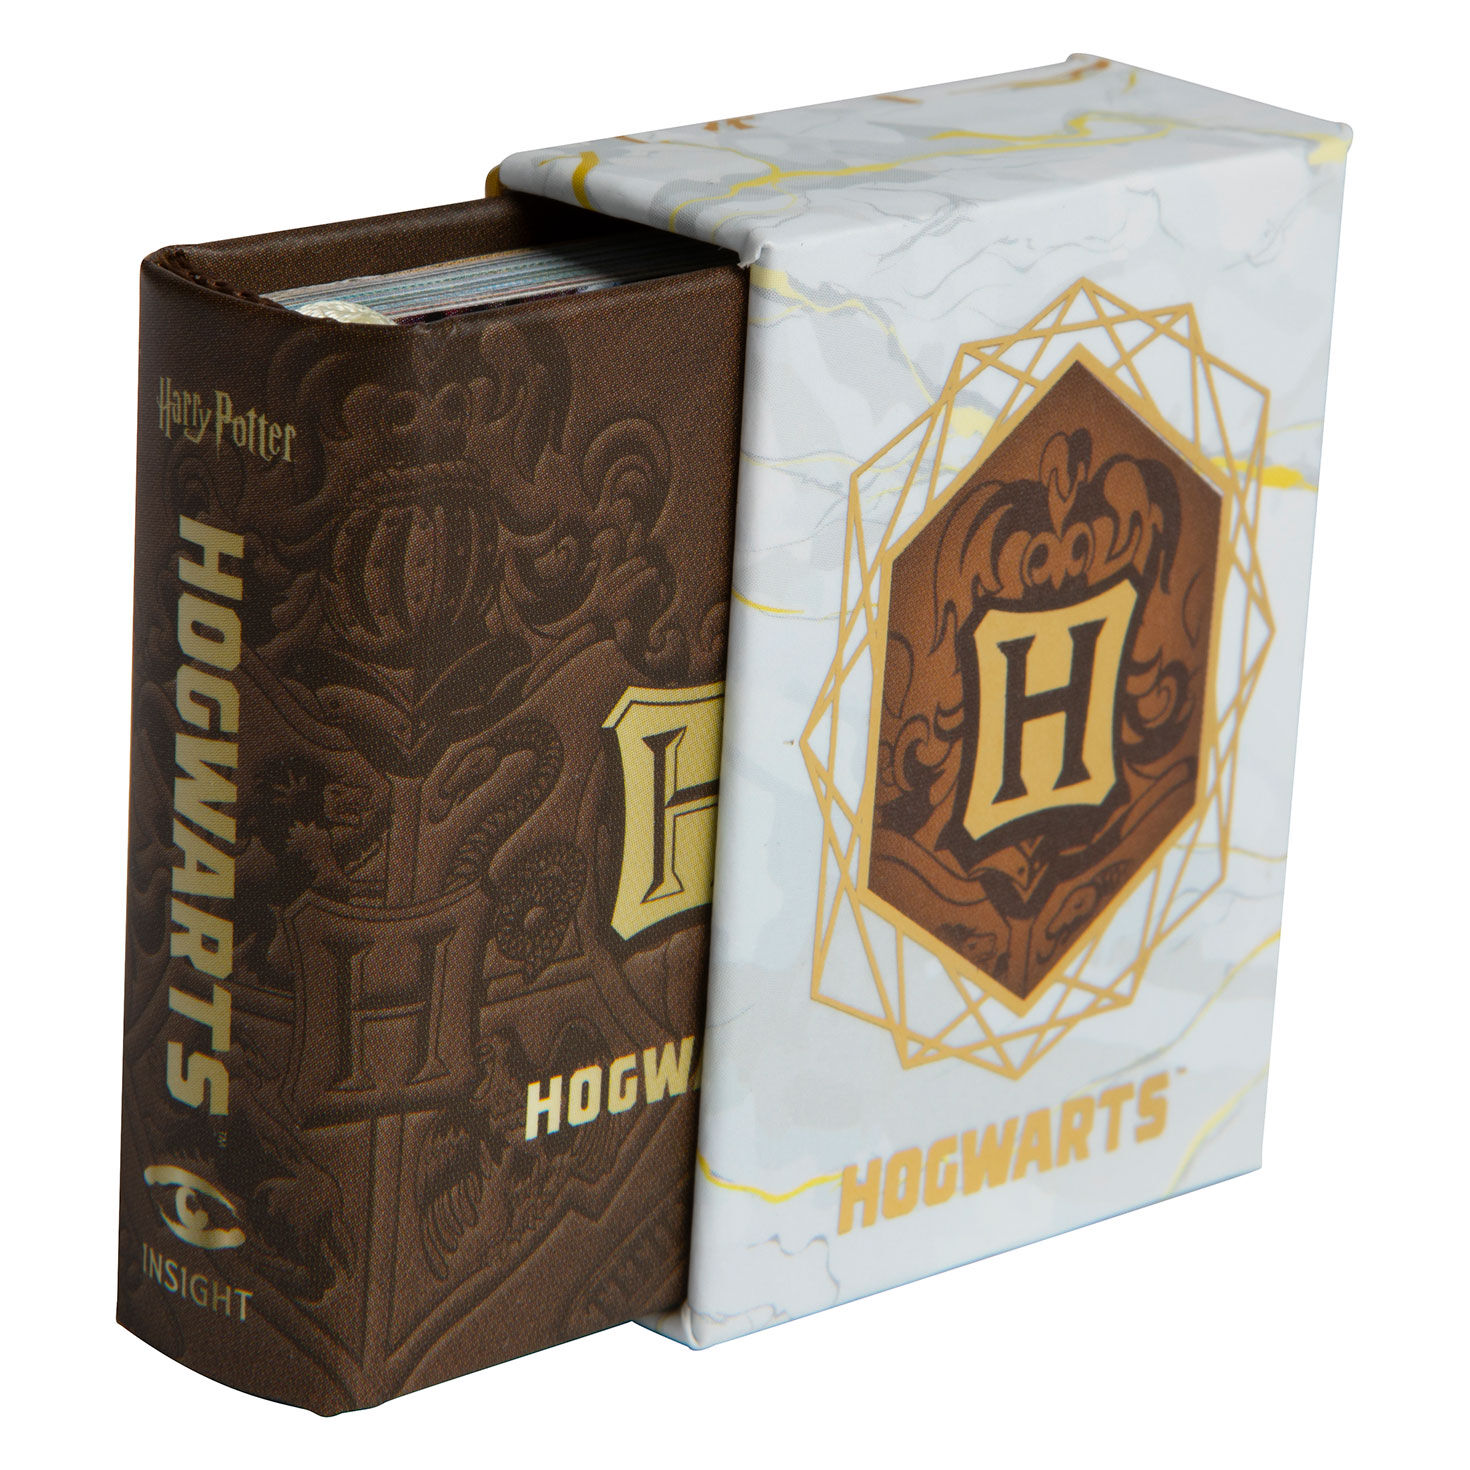 Harry Potter Hogwarts School of Witchcraft and Wizardry Tiny Book for only USD 9.99 | Hallmark